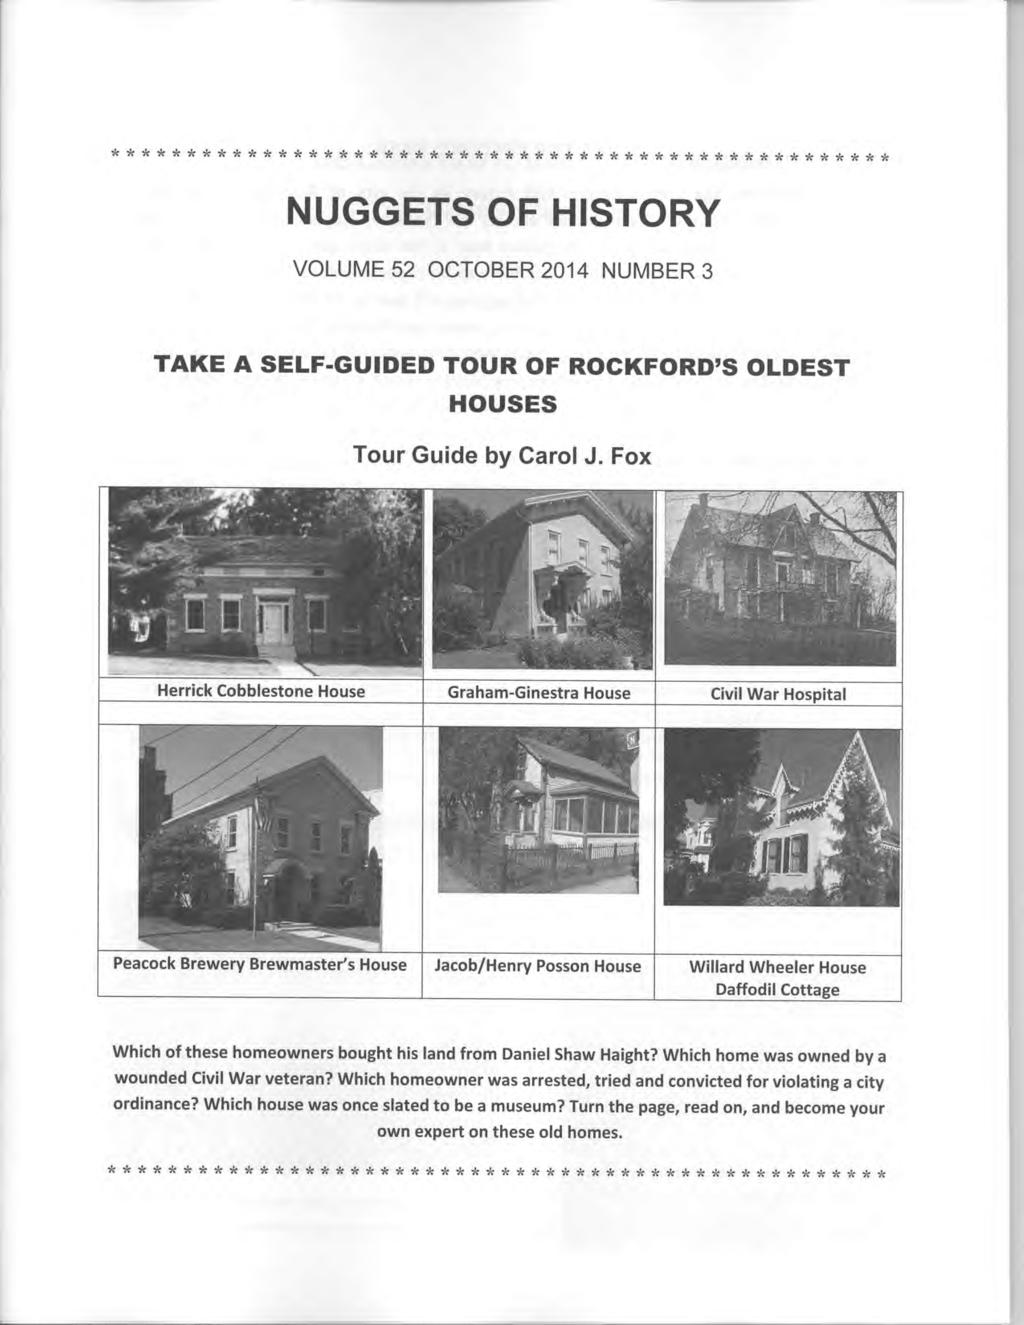 * * * * * * * * * * * * * * * * ** ** ** ** ****** *** * ** ** * ** * ** ** * * * * ** NUGGETS OF HISTORY VOLUME 52 OCTOBER 2014 NUMBER 3 TAKE A SELF-GUIDED TOUR OF ROCKFORD'S OLDEST HOUSES Tour